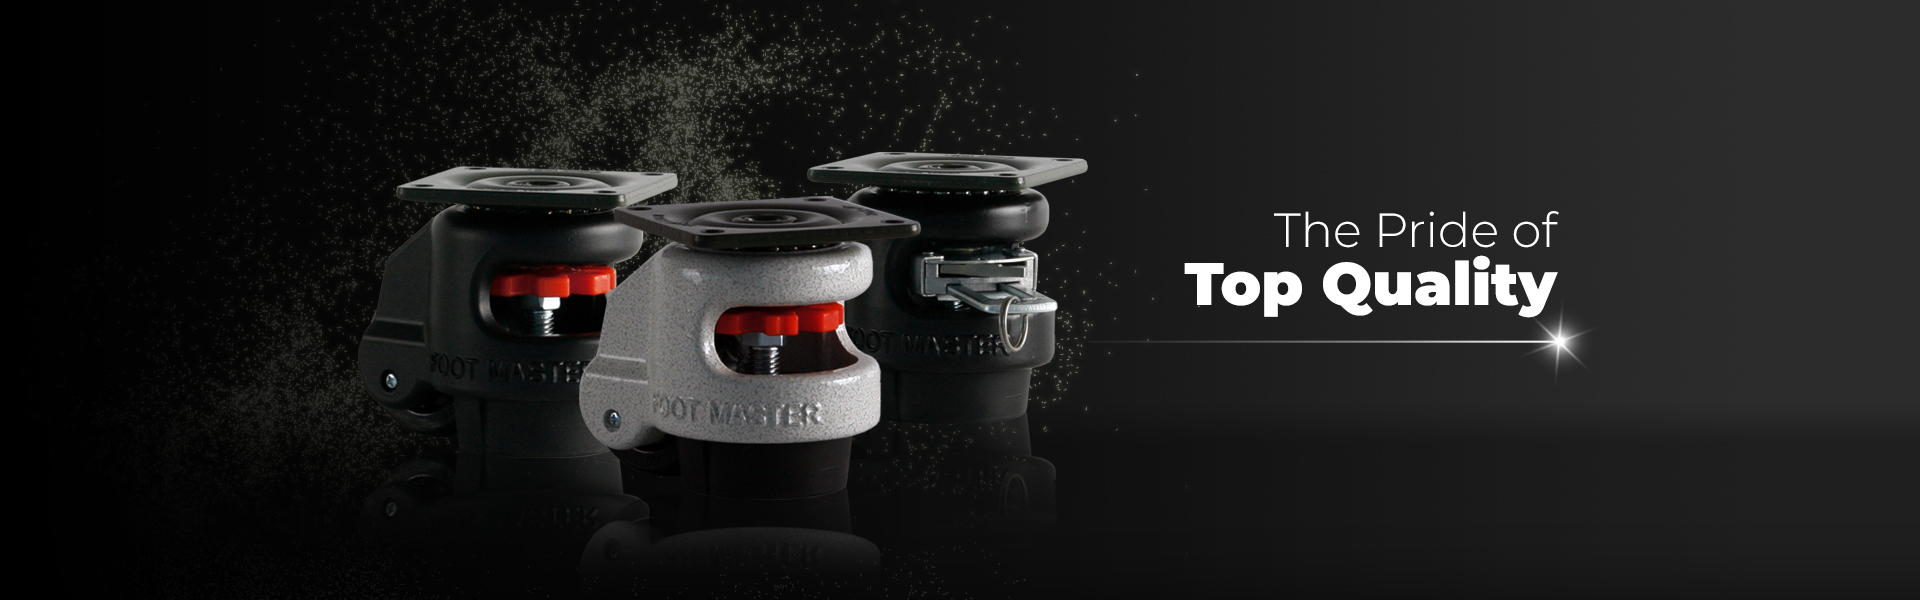 FOOT MASTER Casters, Leveling casters, The pride of Top Quality